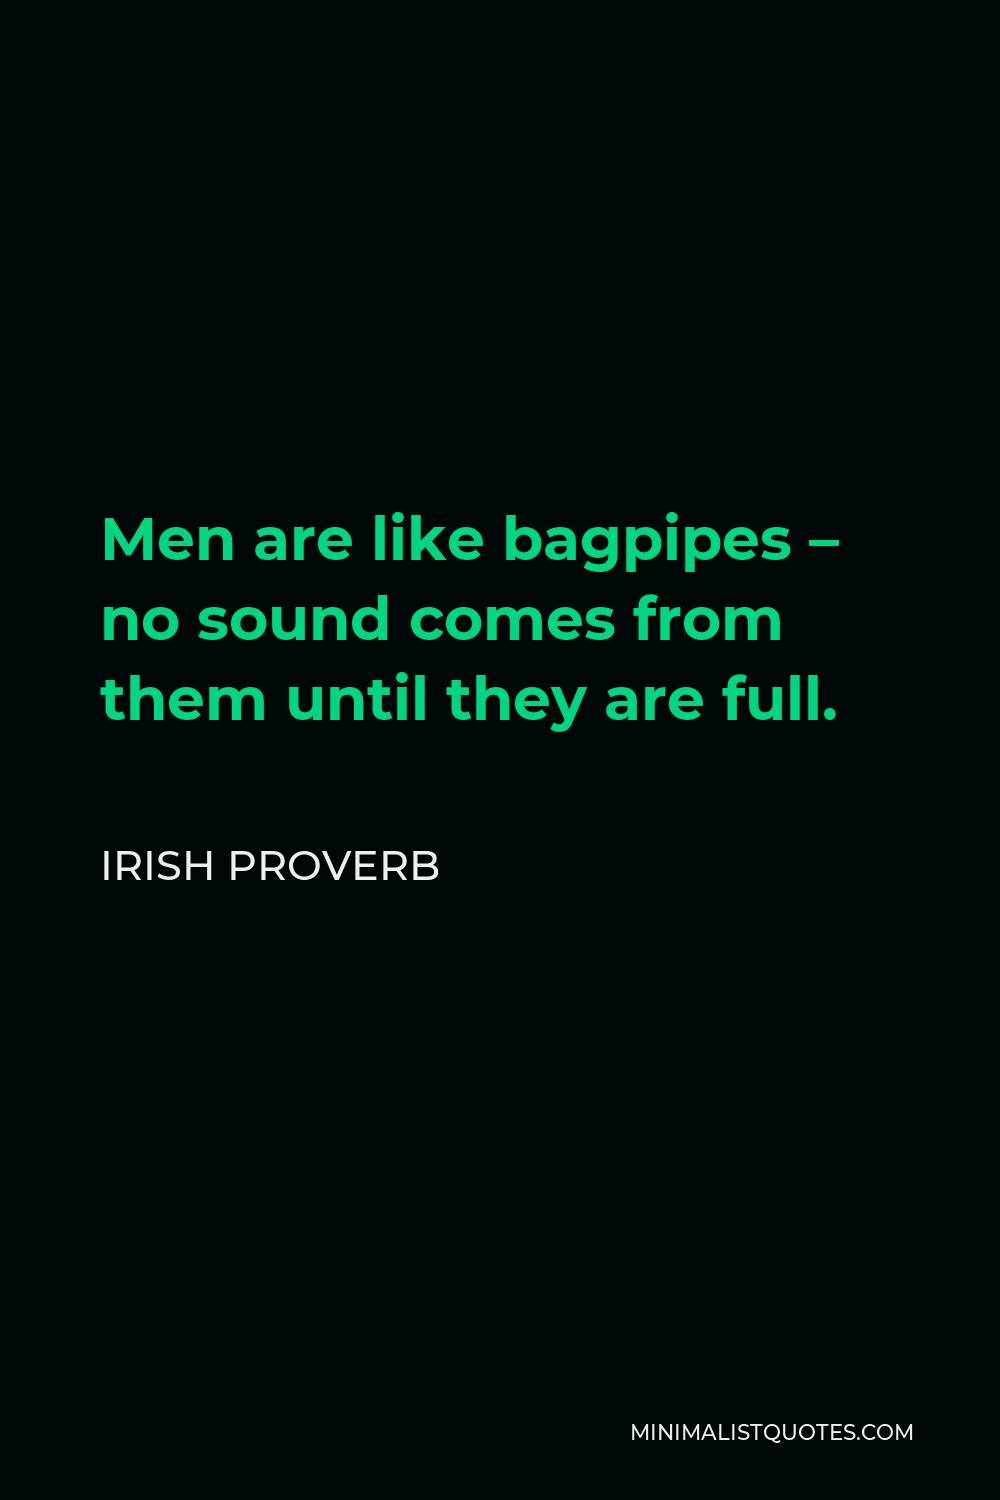 Irish Proverb Quote - Men are like bagpipes – no sound comes from them until they are full.